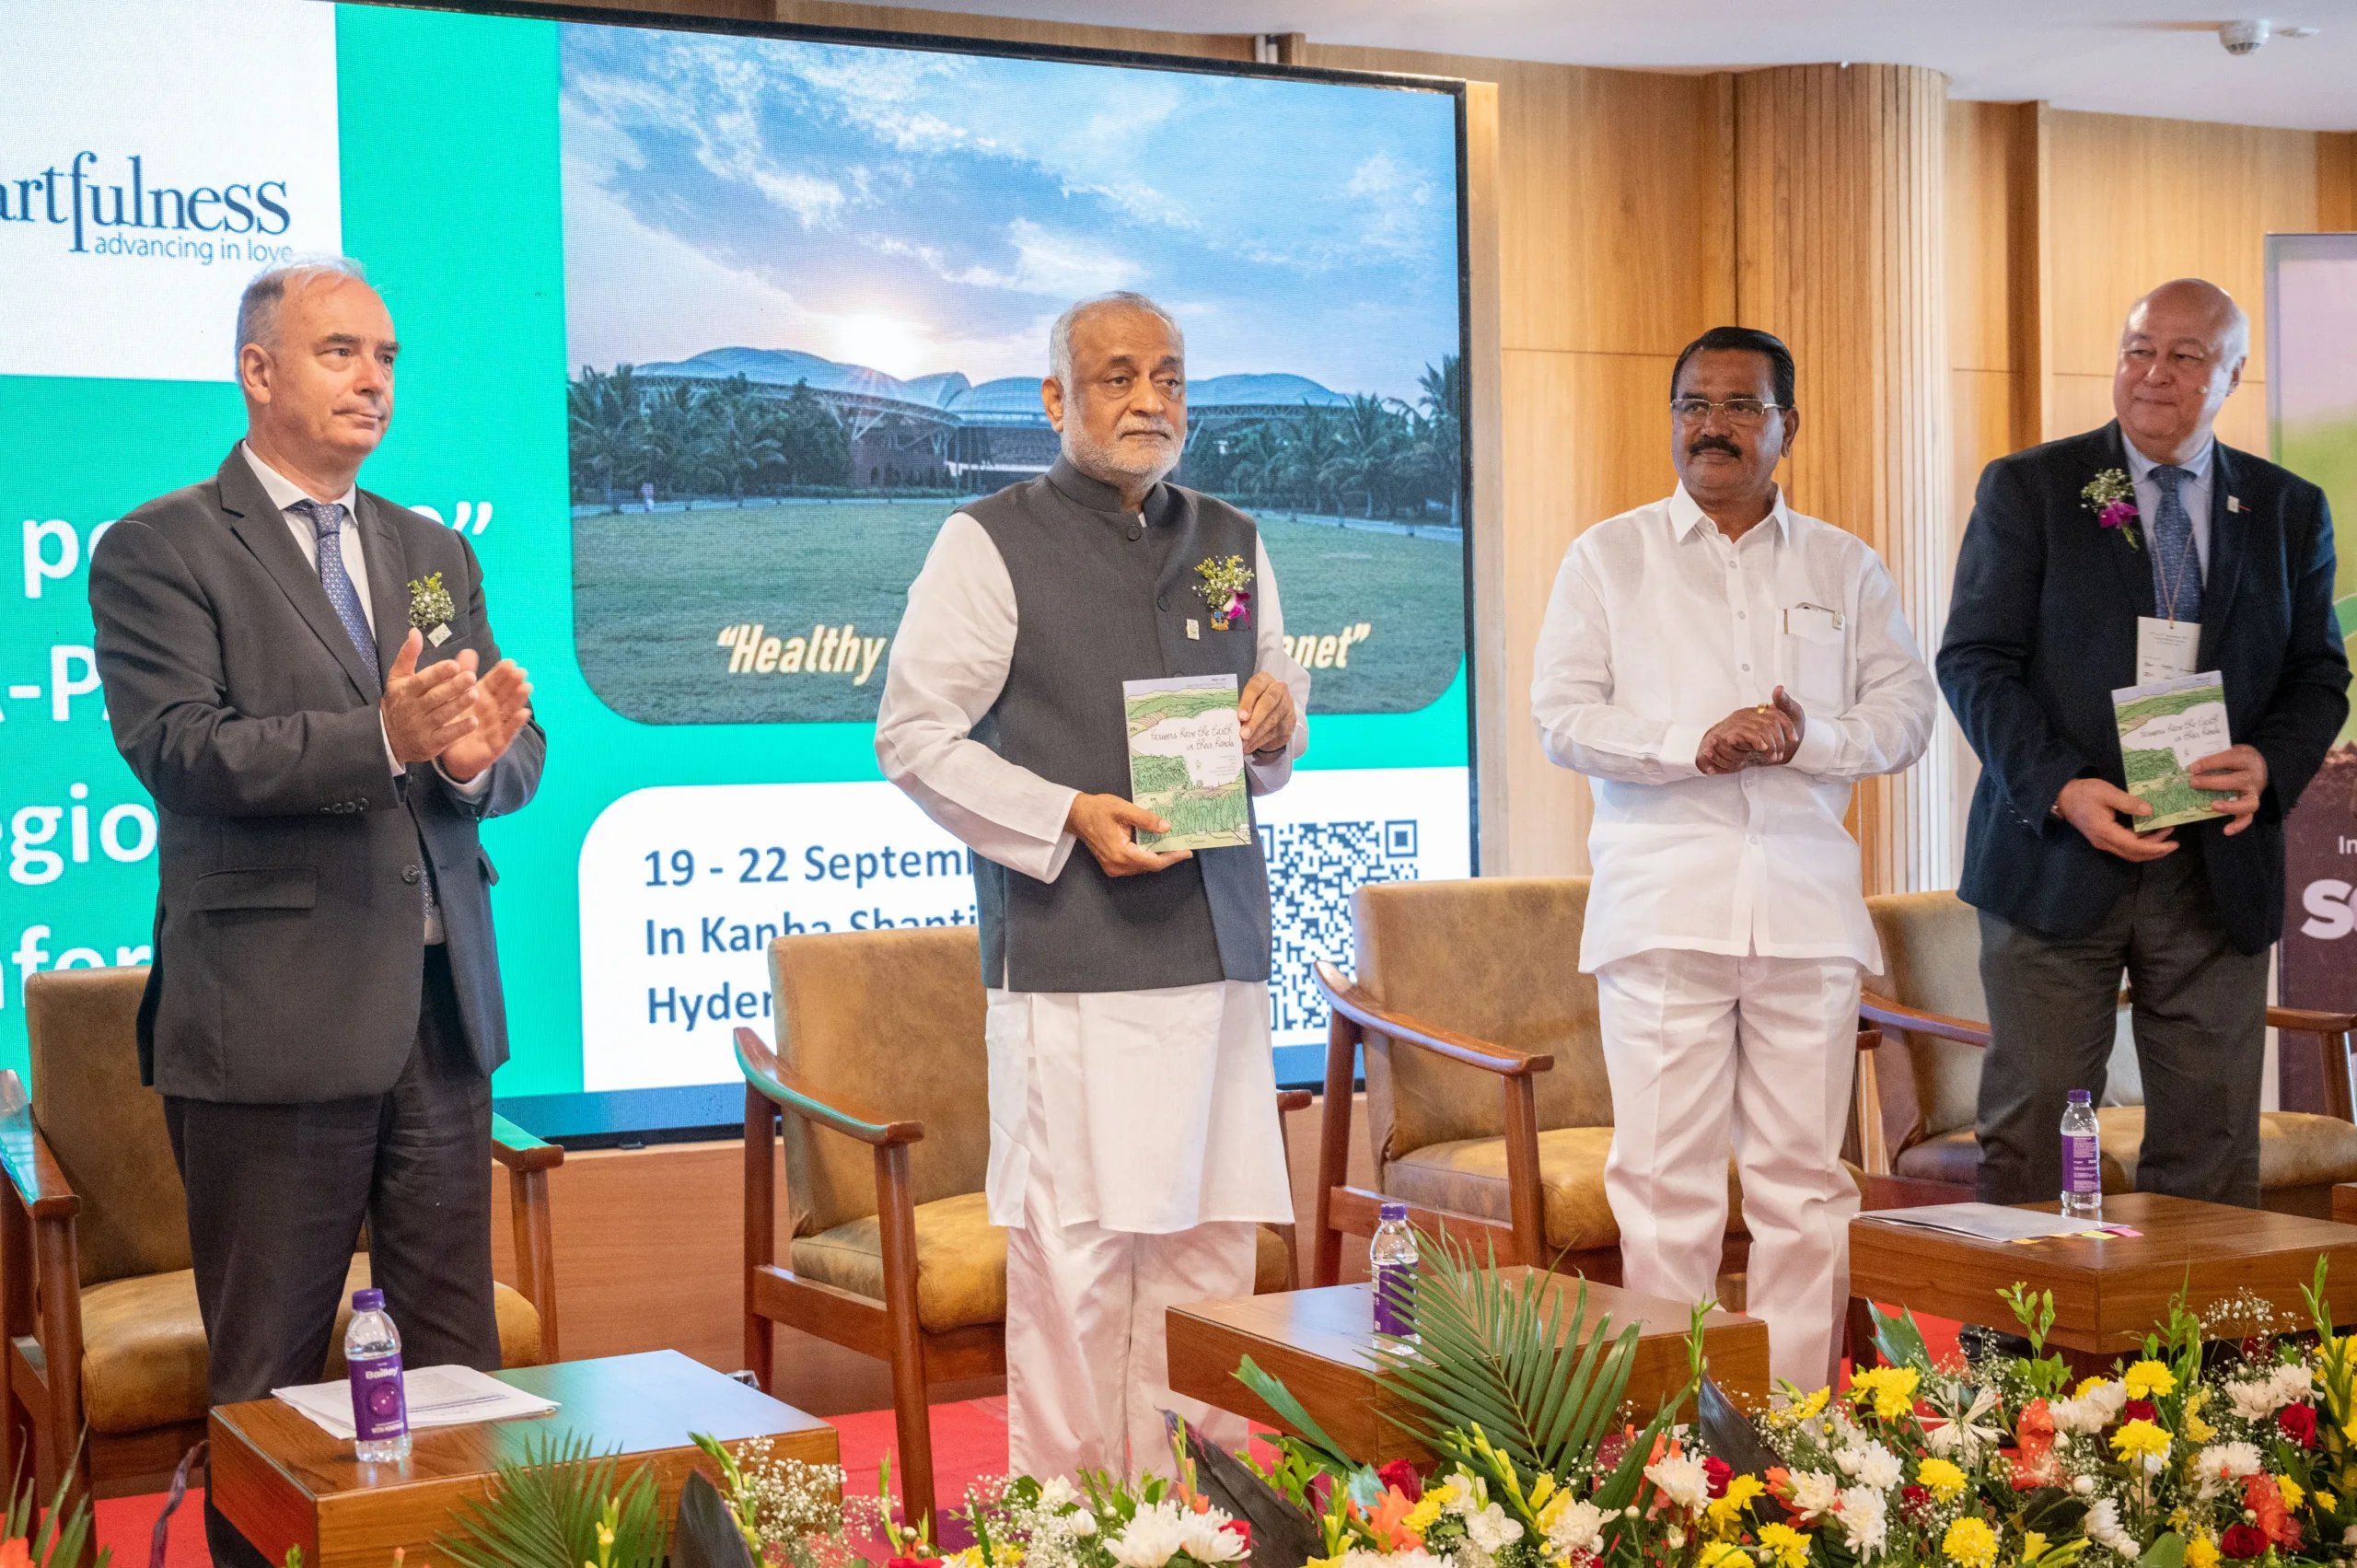 Agri ministries and NGOs from 18 countries come together for a three-day “4 per 1000 Asia-Pacific Regional Conference” hosted at Kanha Shanti Vanam